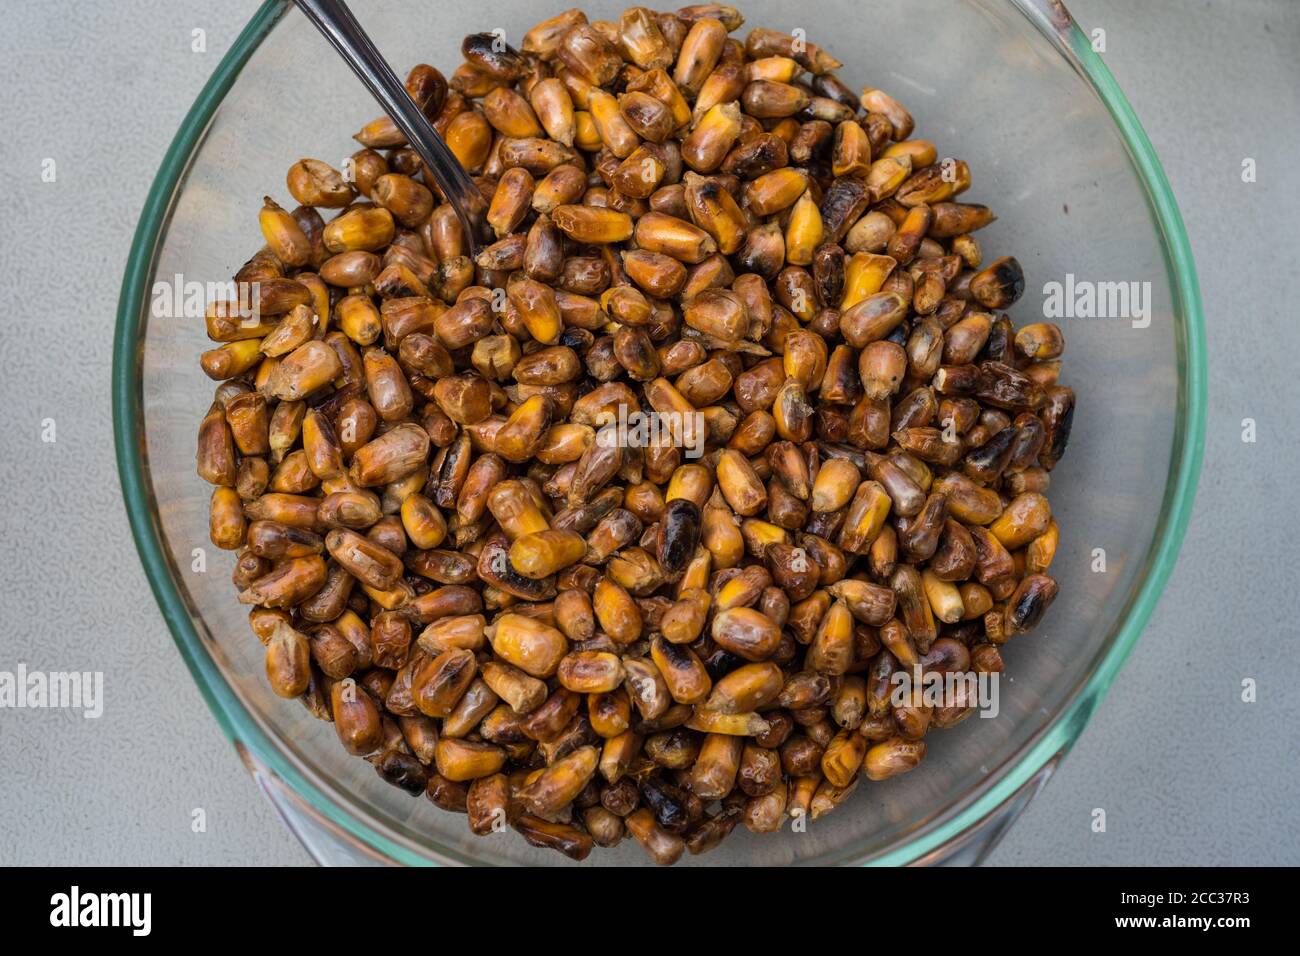 Top view of a glass bowl full of toasted Peruvian corn. Toasted canchita or chulpe corn often served alongside ceviche. Stock Photo